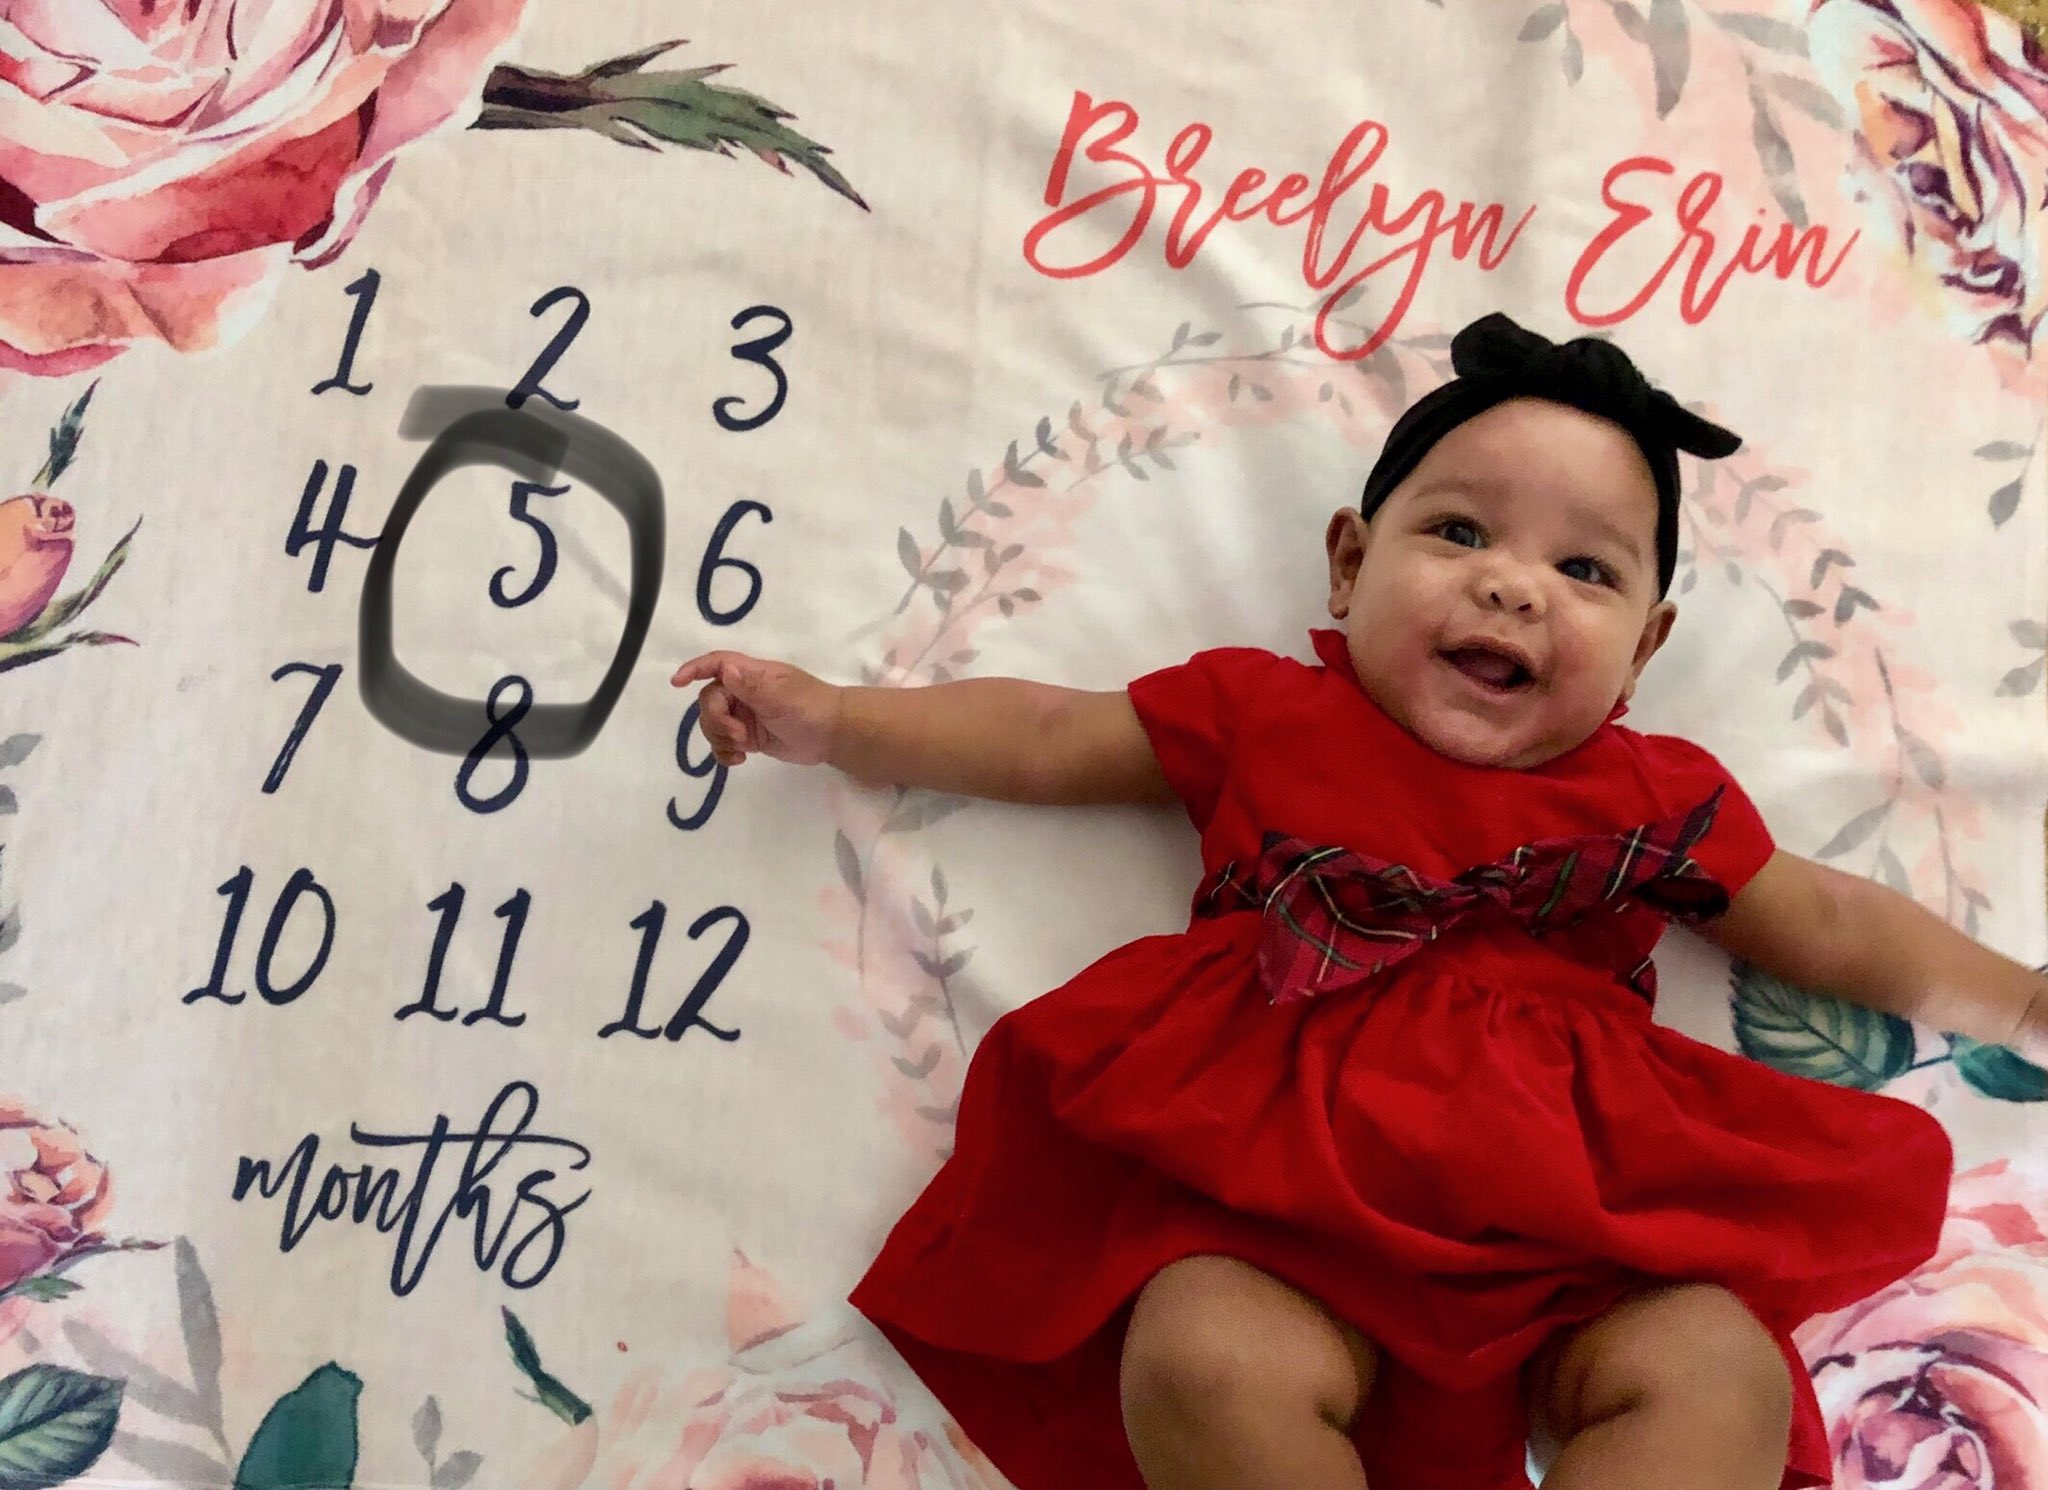 5 months baby girl photoshoot ideas